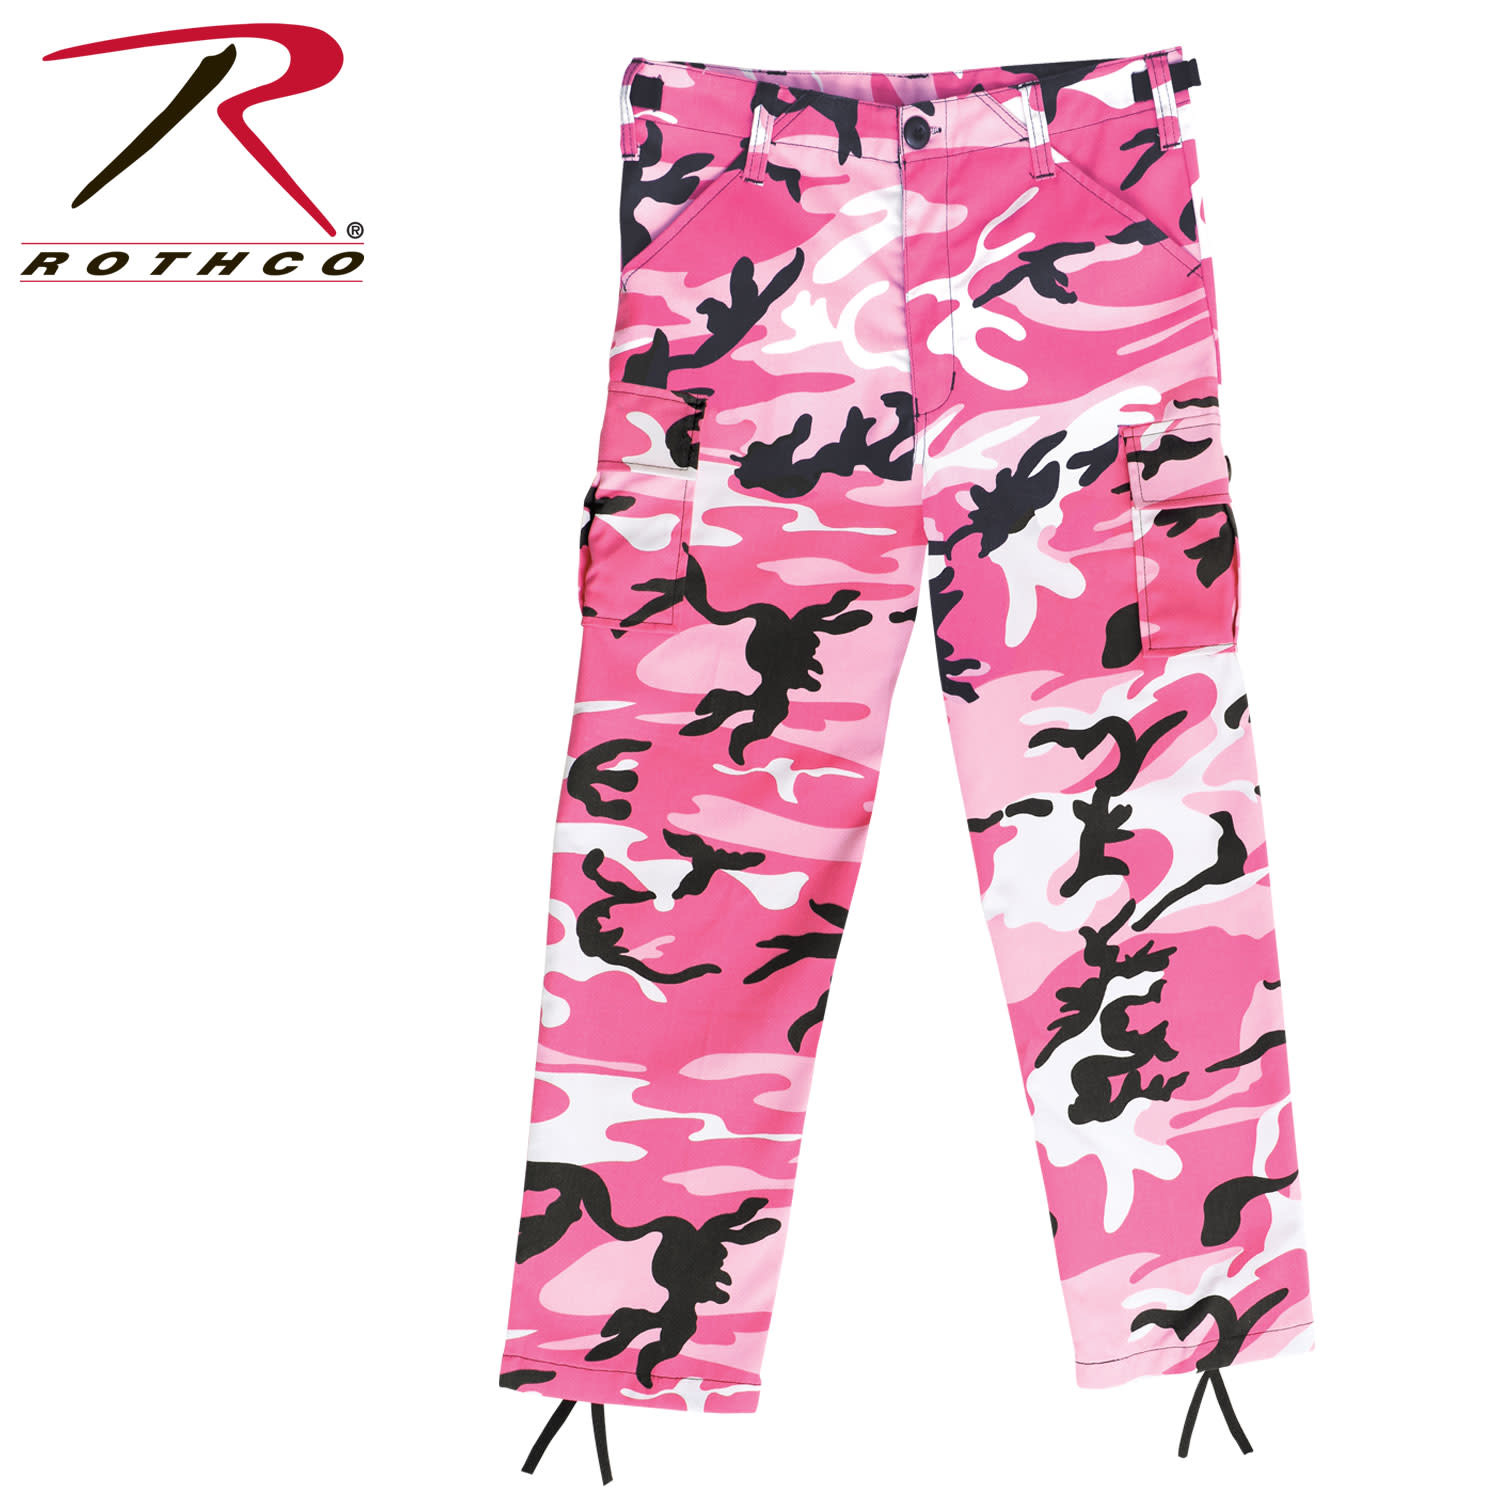 Kids Camouflage Military Style Trousers Pink - Army Supply Store Military